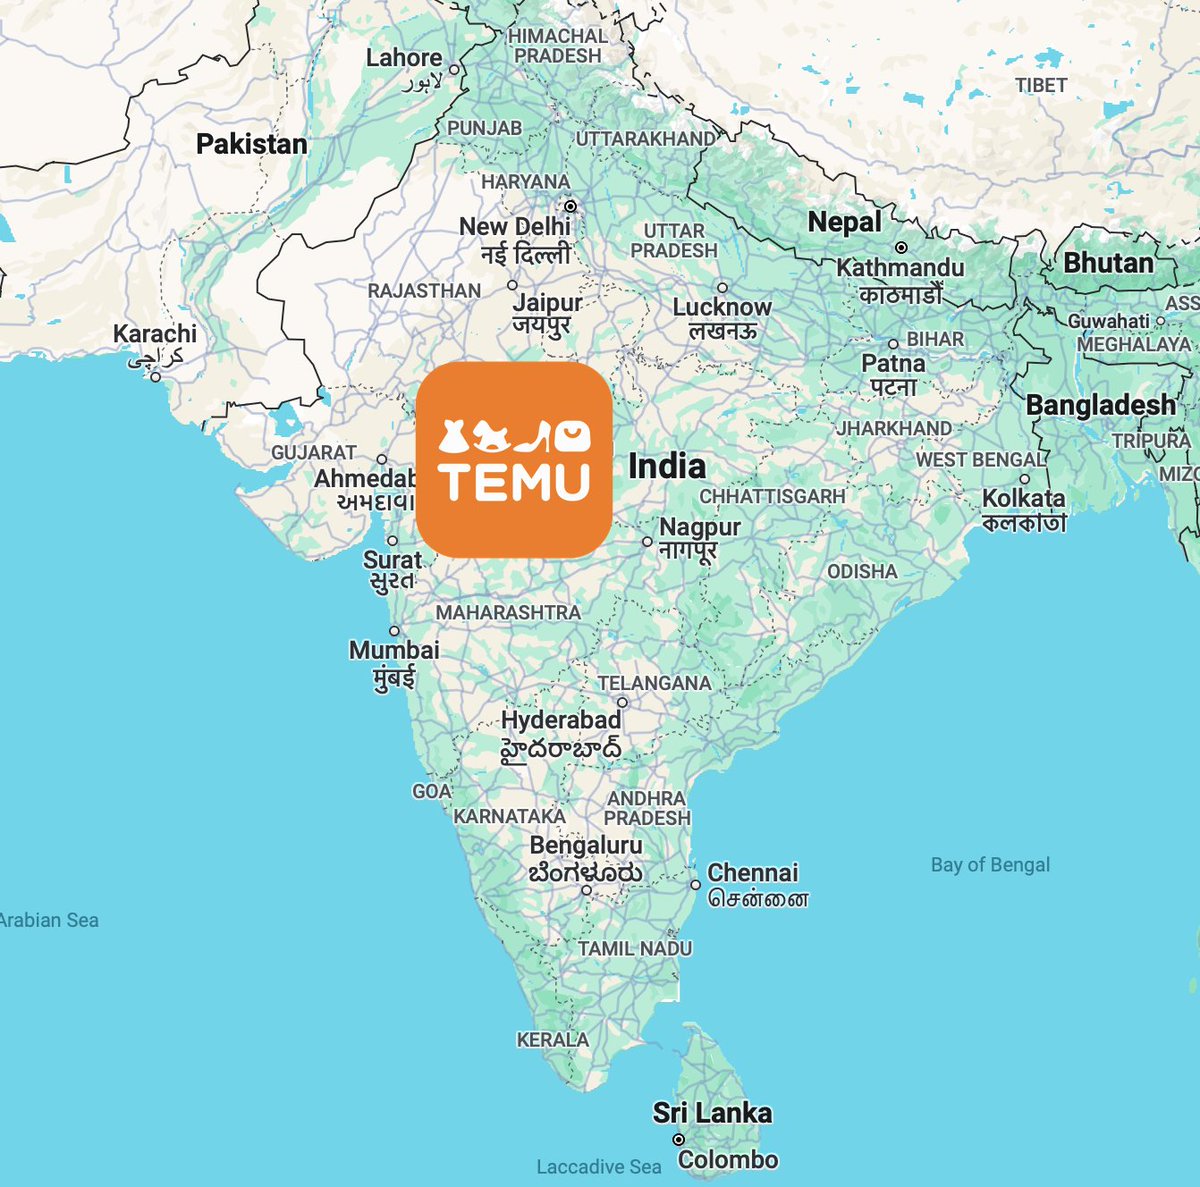 When is Temu of India launching? Temu integrates suppliers at the source, enabling consumer-to-manufacturer to the West. Cheap prices for shoppers, easy for merchants; works because Temu handles the supply chain. But Temu is for buying from China. The model should work elsewhere.